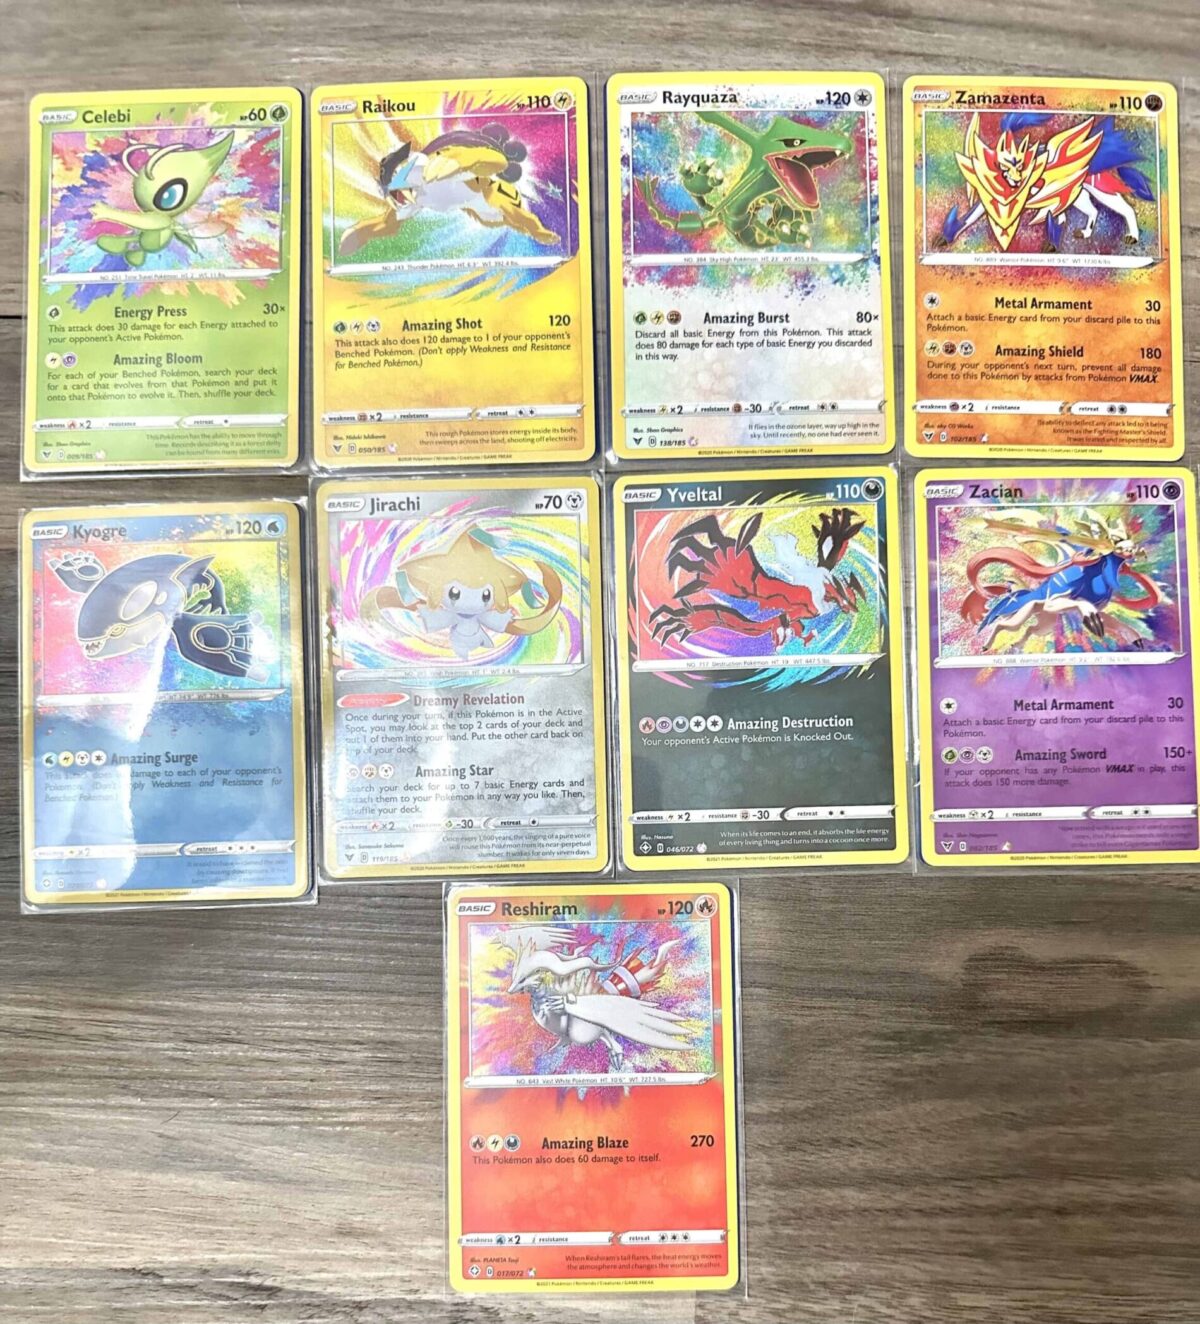 All Amazing Rare Pokemon Cards (Complete List) - Card Gamer